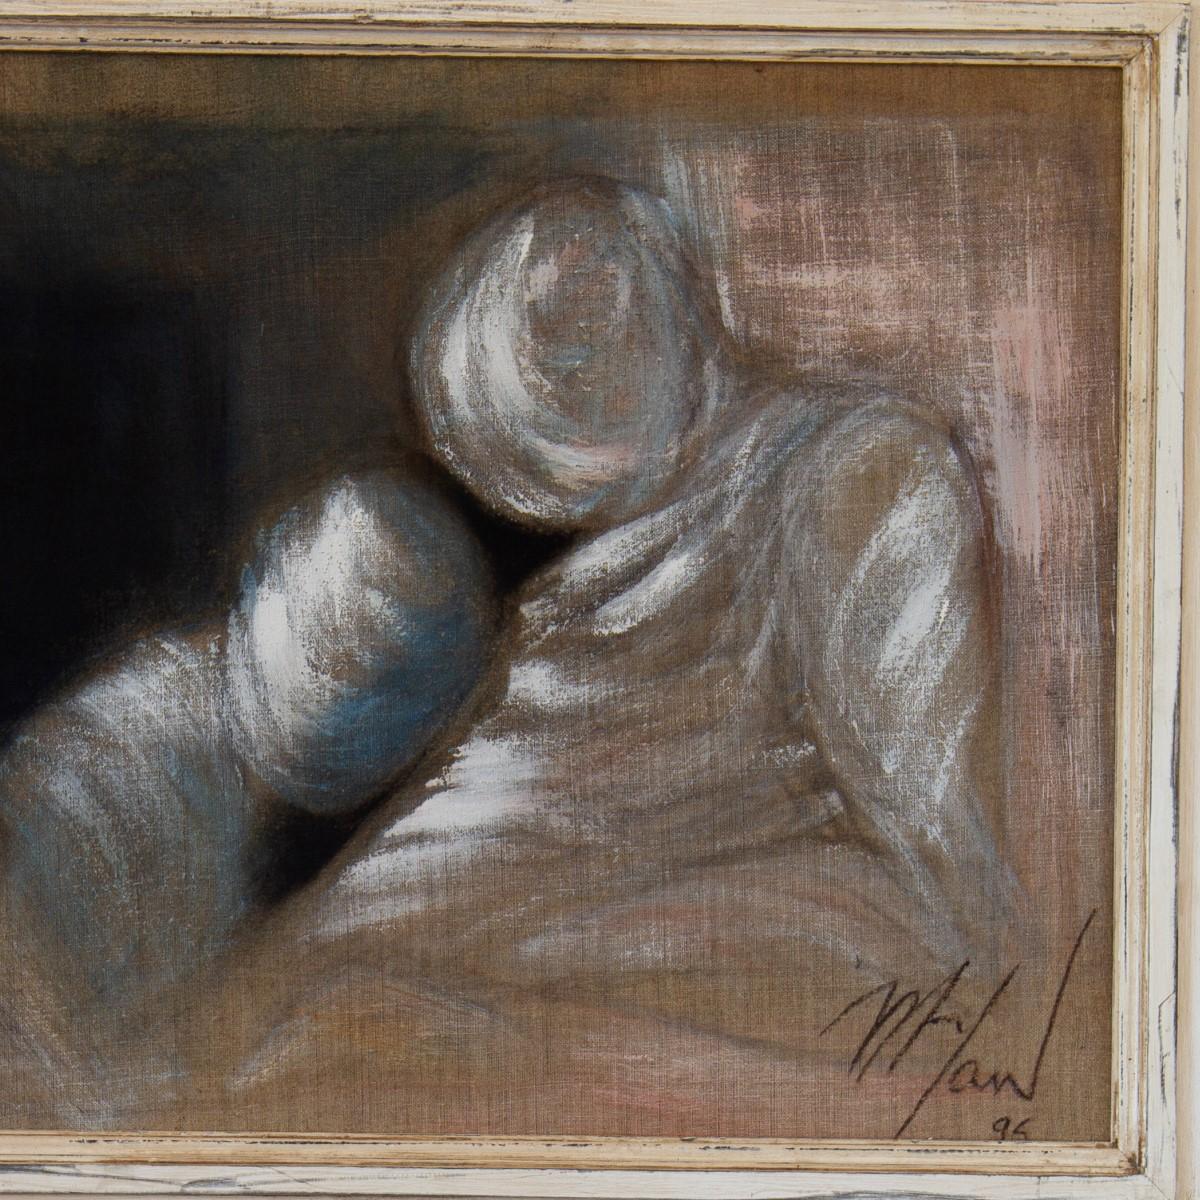 A French framed oil on canvas painting of a couple by Mickey Pfau 1996

Bought directly from the artist in the 1990s by Ken, for his own private collection. These paintings would look as a single piece of artwork but also en-masse. Ken has several